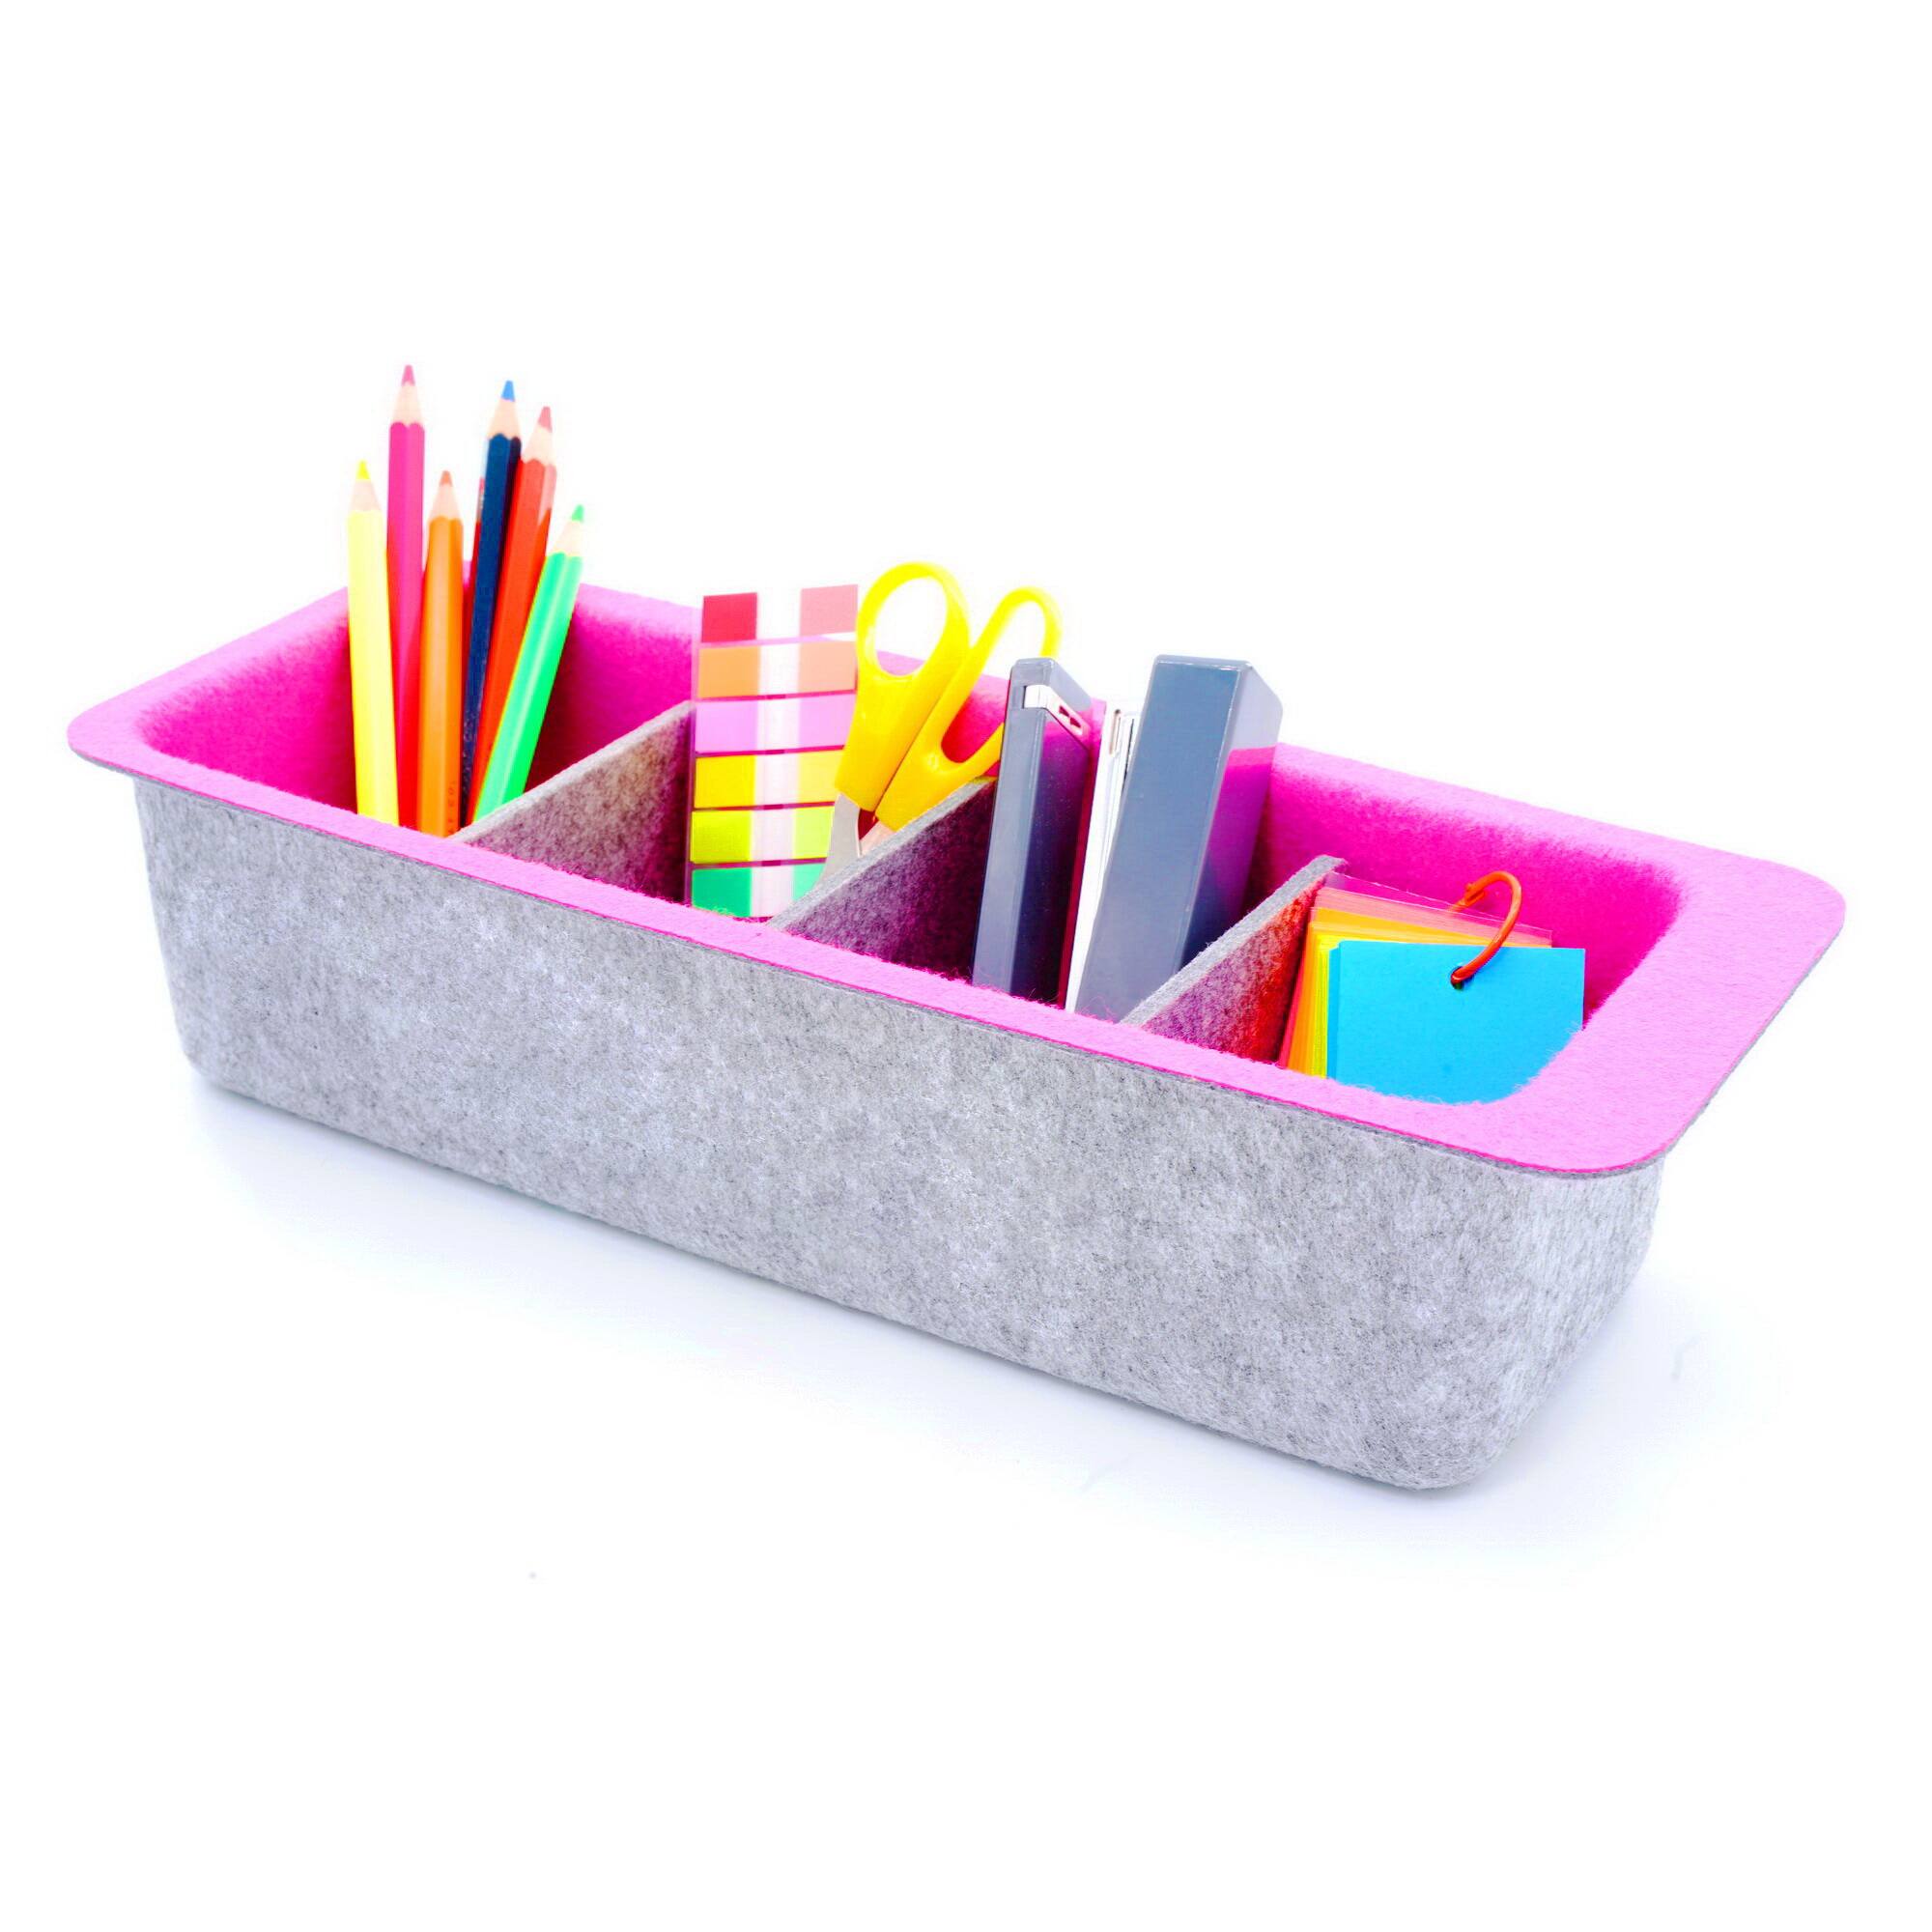 Welaxy office Drawer organizers bins Deep draw organiser Felt storage bin  drawers Desk draw dividers boxes for toys makeup jewelery rolled ties